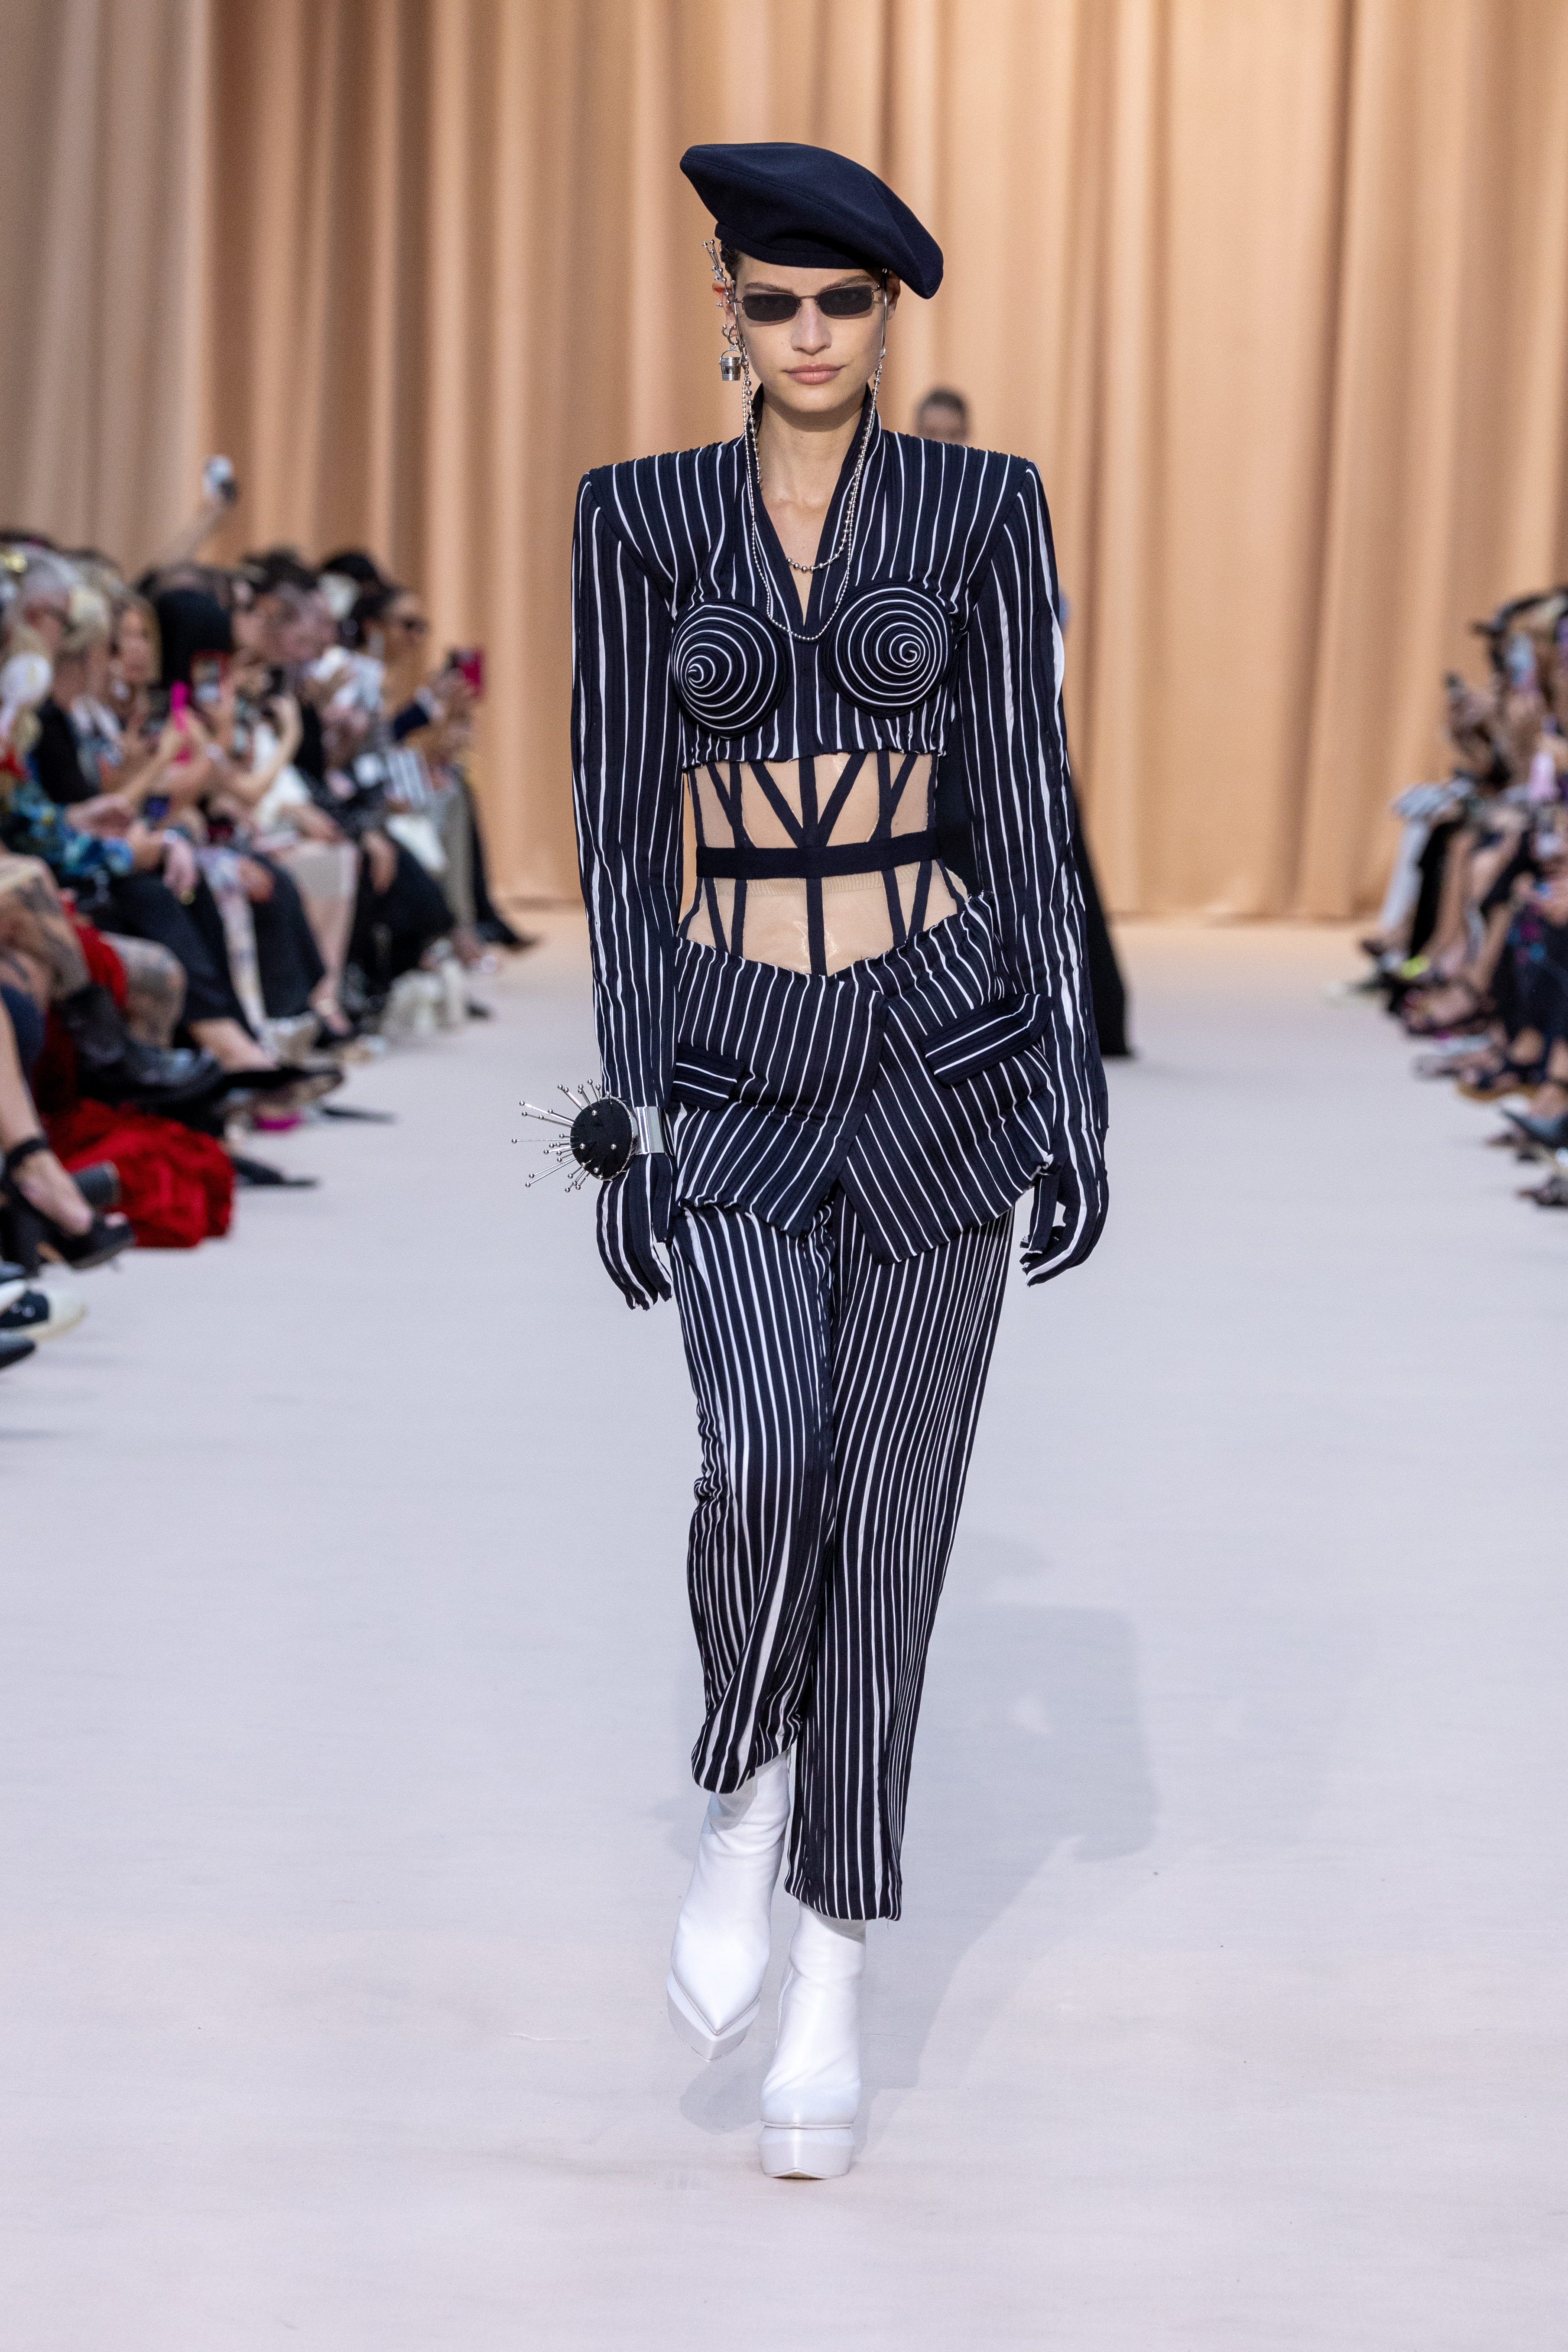 Olivier Rousteing Designs a Loving Tribute to Jean-Paul Gaultier